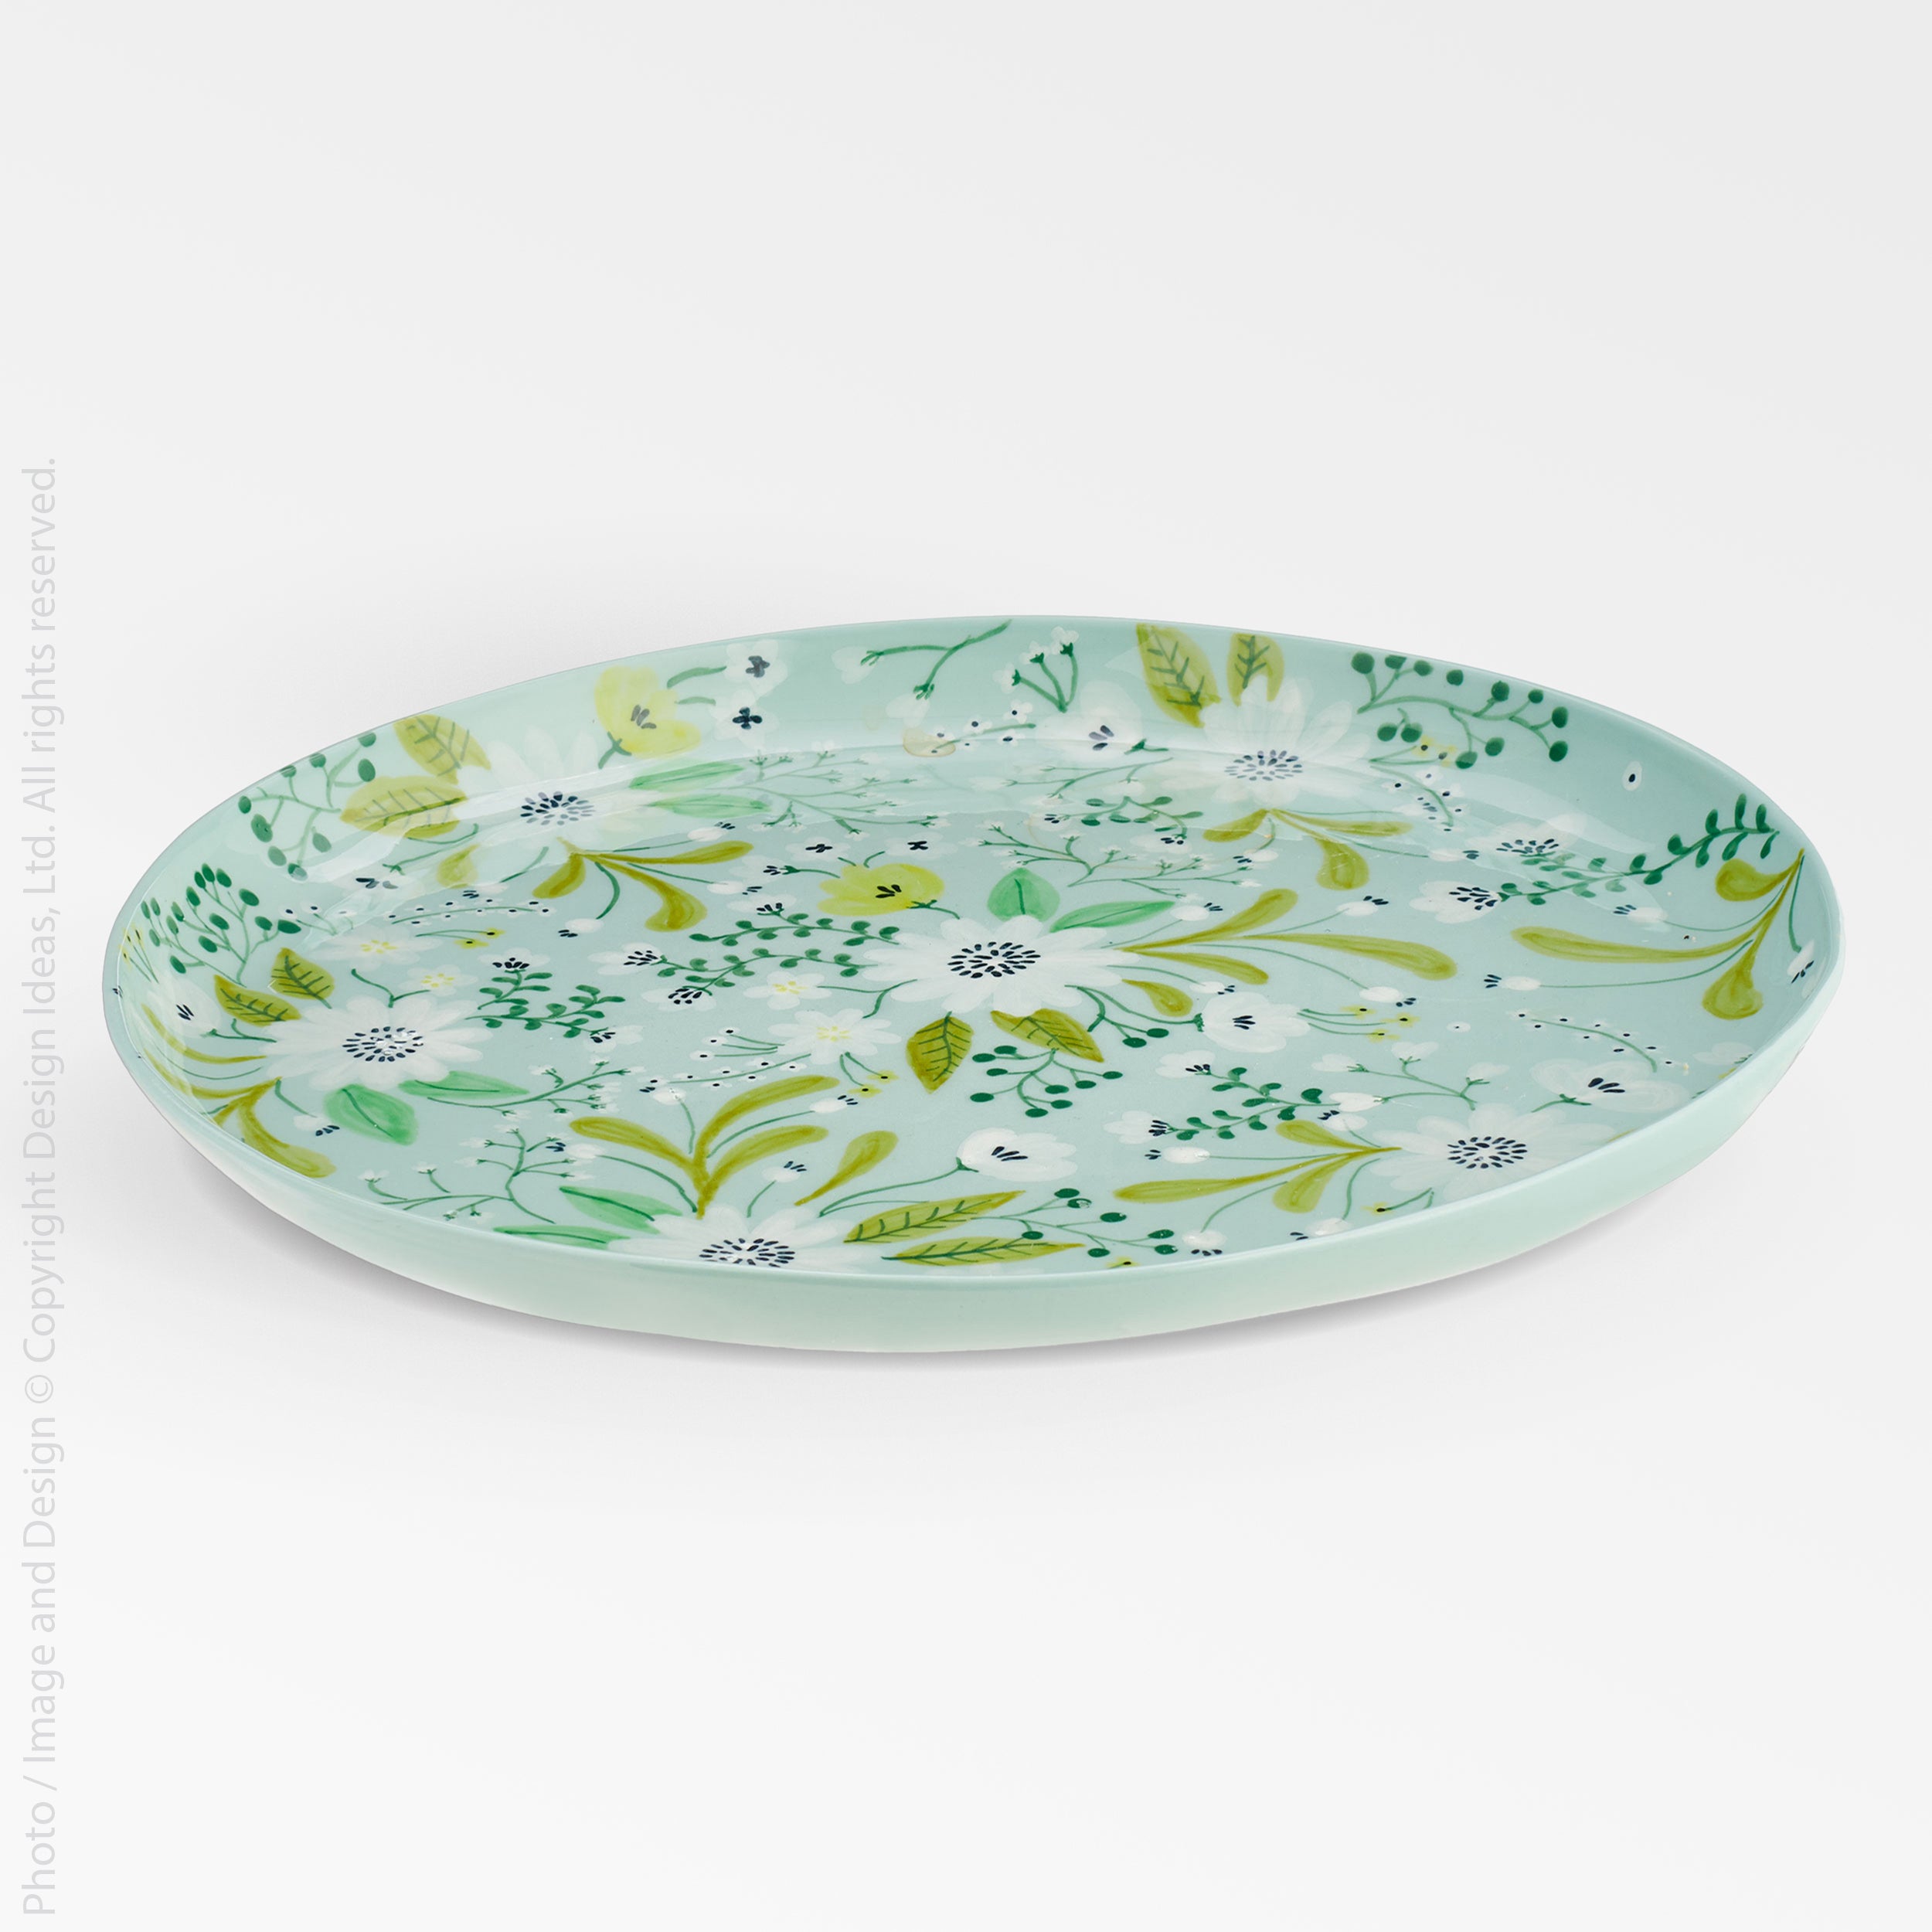 Bloomsbury™ platter - Mint | Image 1 | Premium Platter from the Bloomsbury collection | made with Kaolin clay for long lasting use | texxture